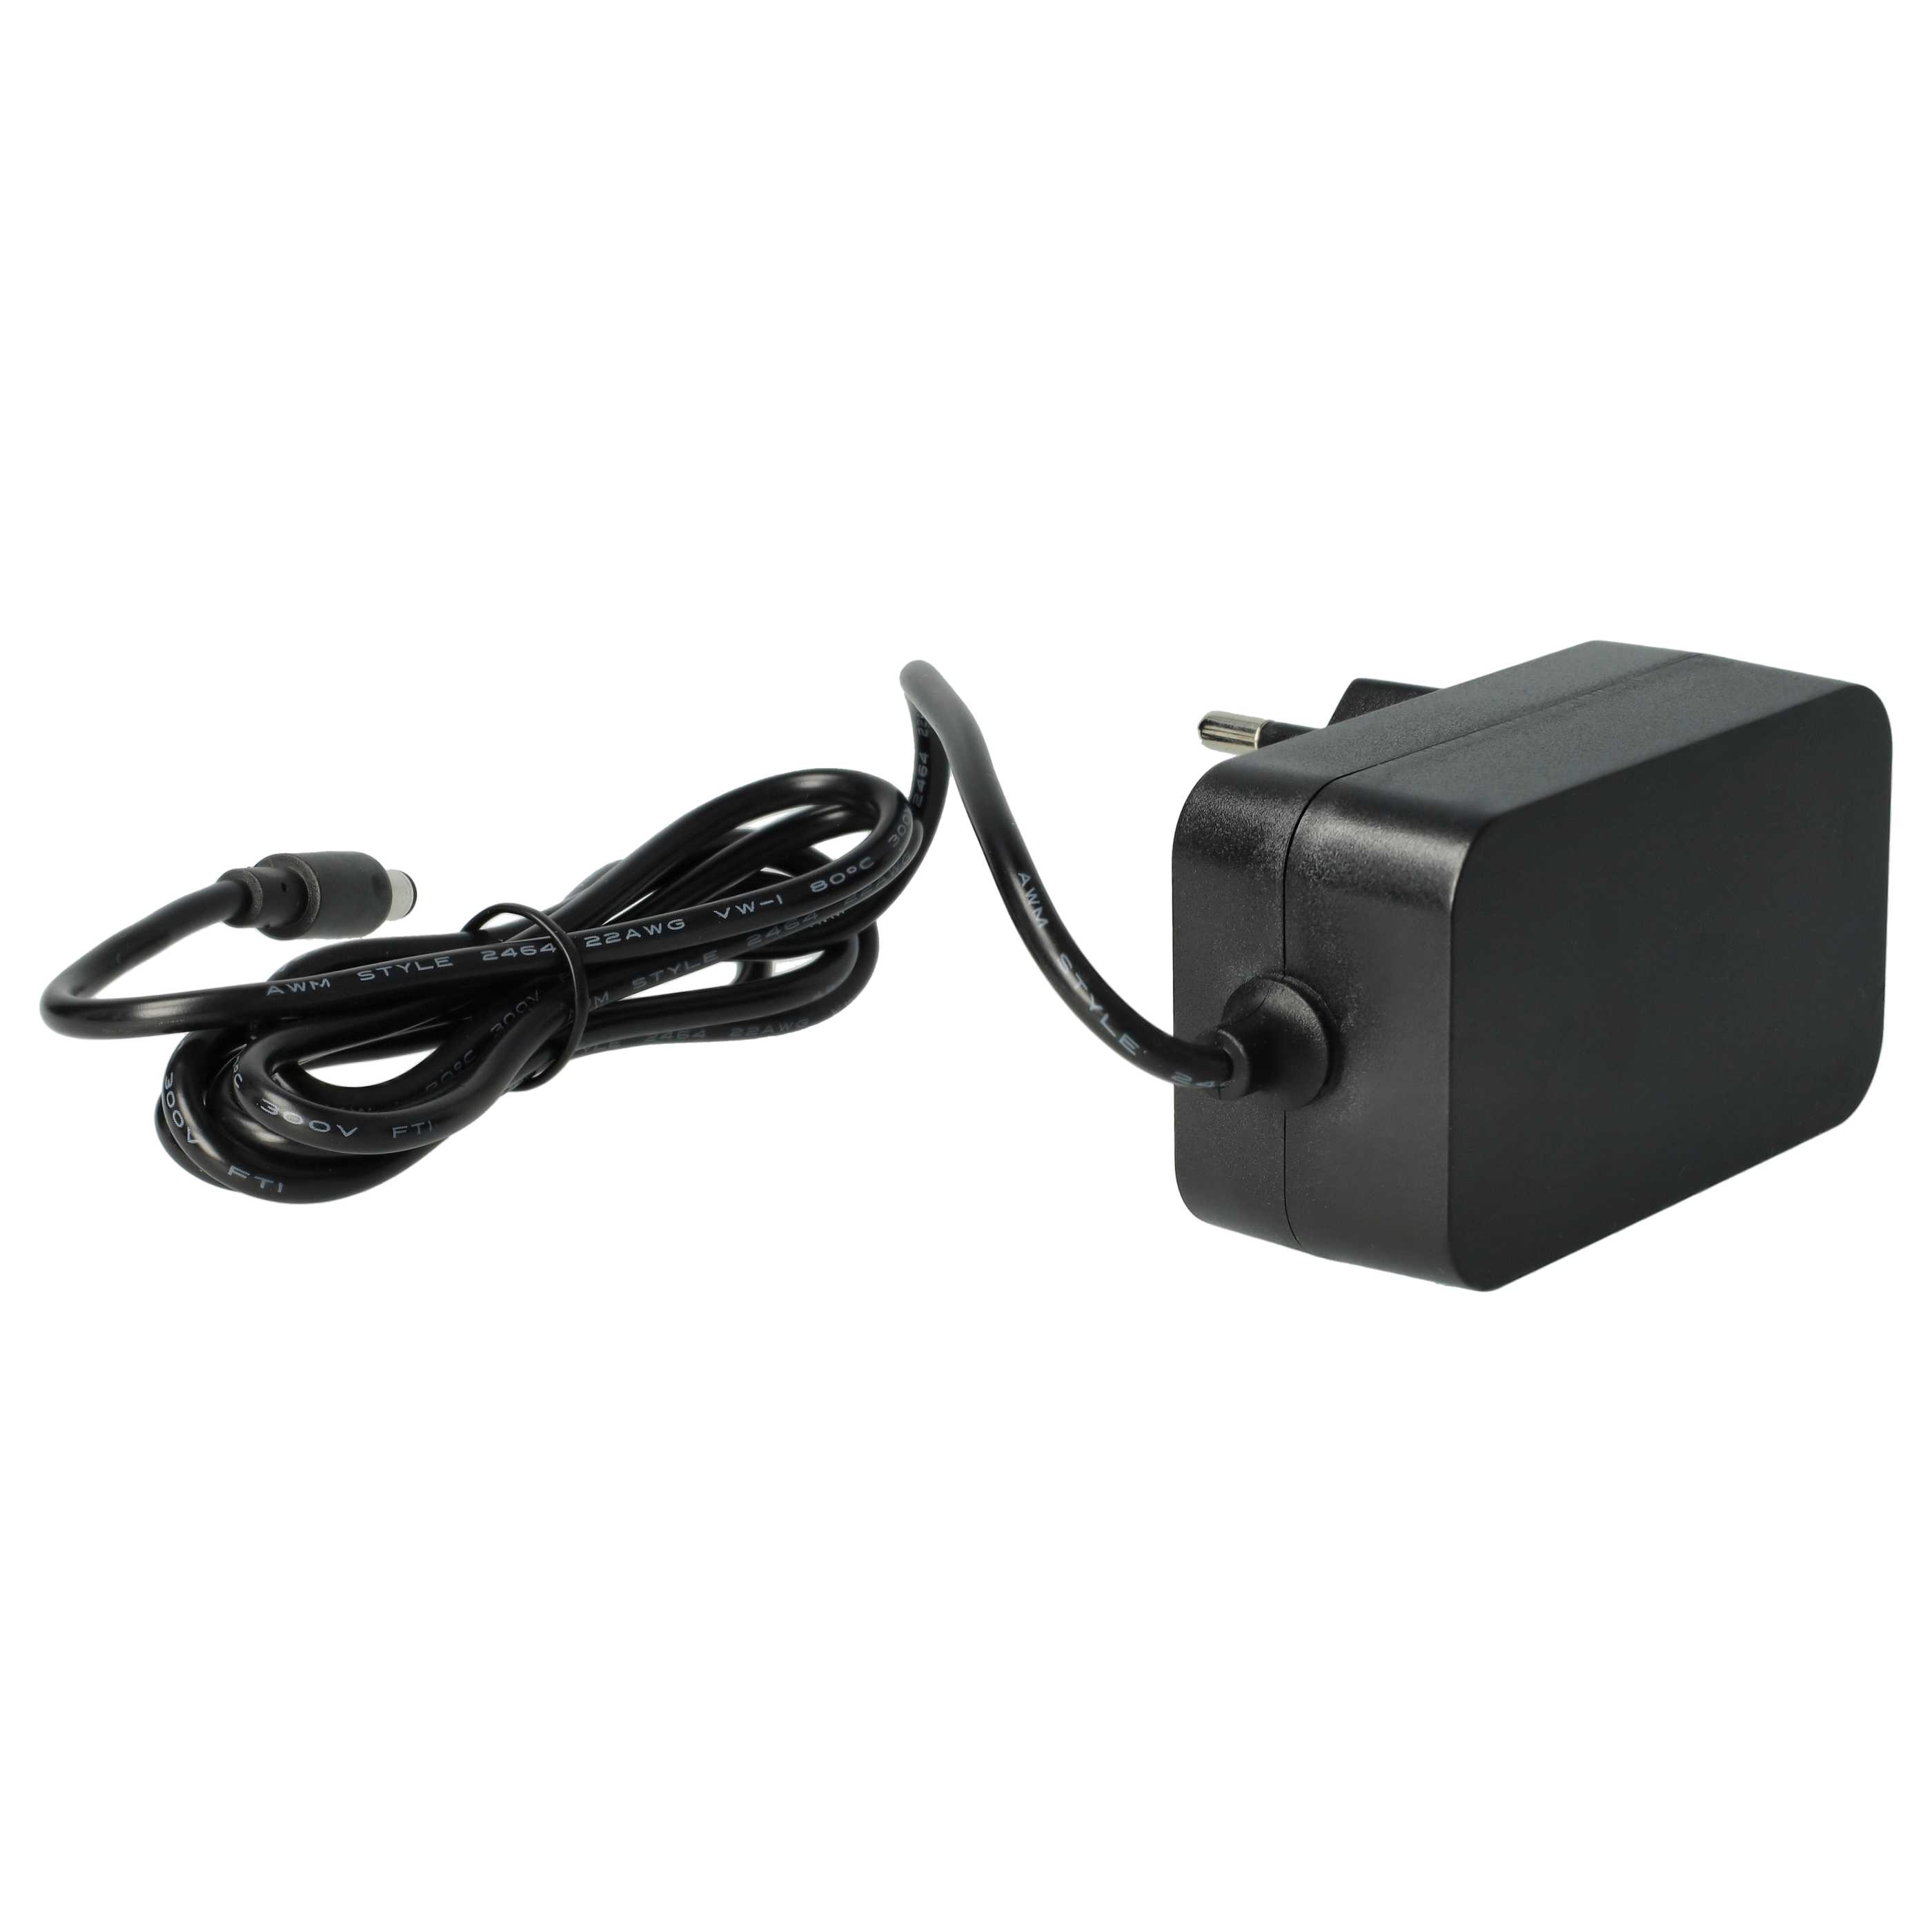 Mains Power Adapter replaces AVM 311POW165, 311POW134 for Huawei router etc. - 140 cm